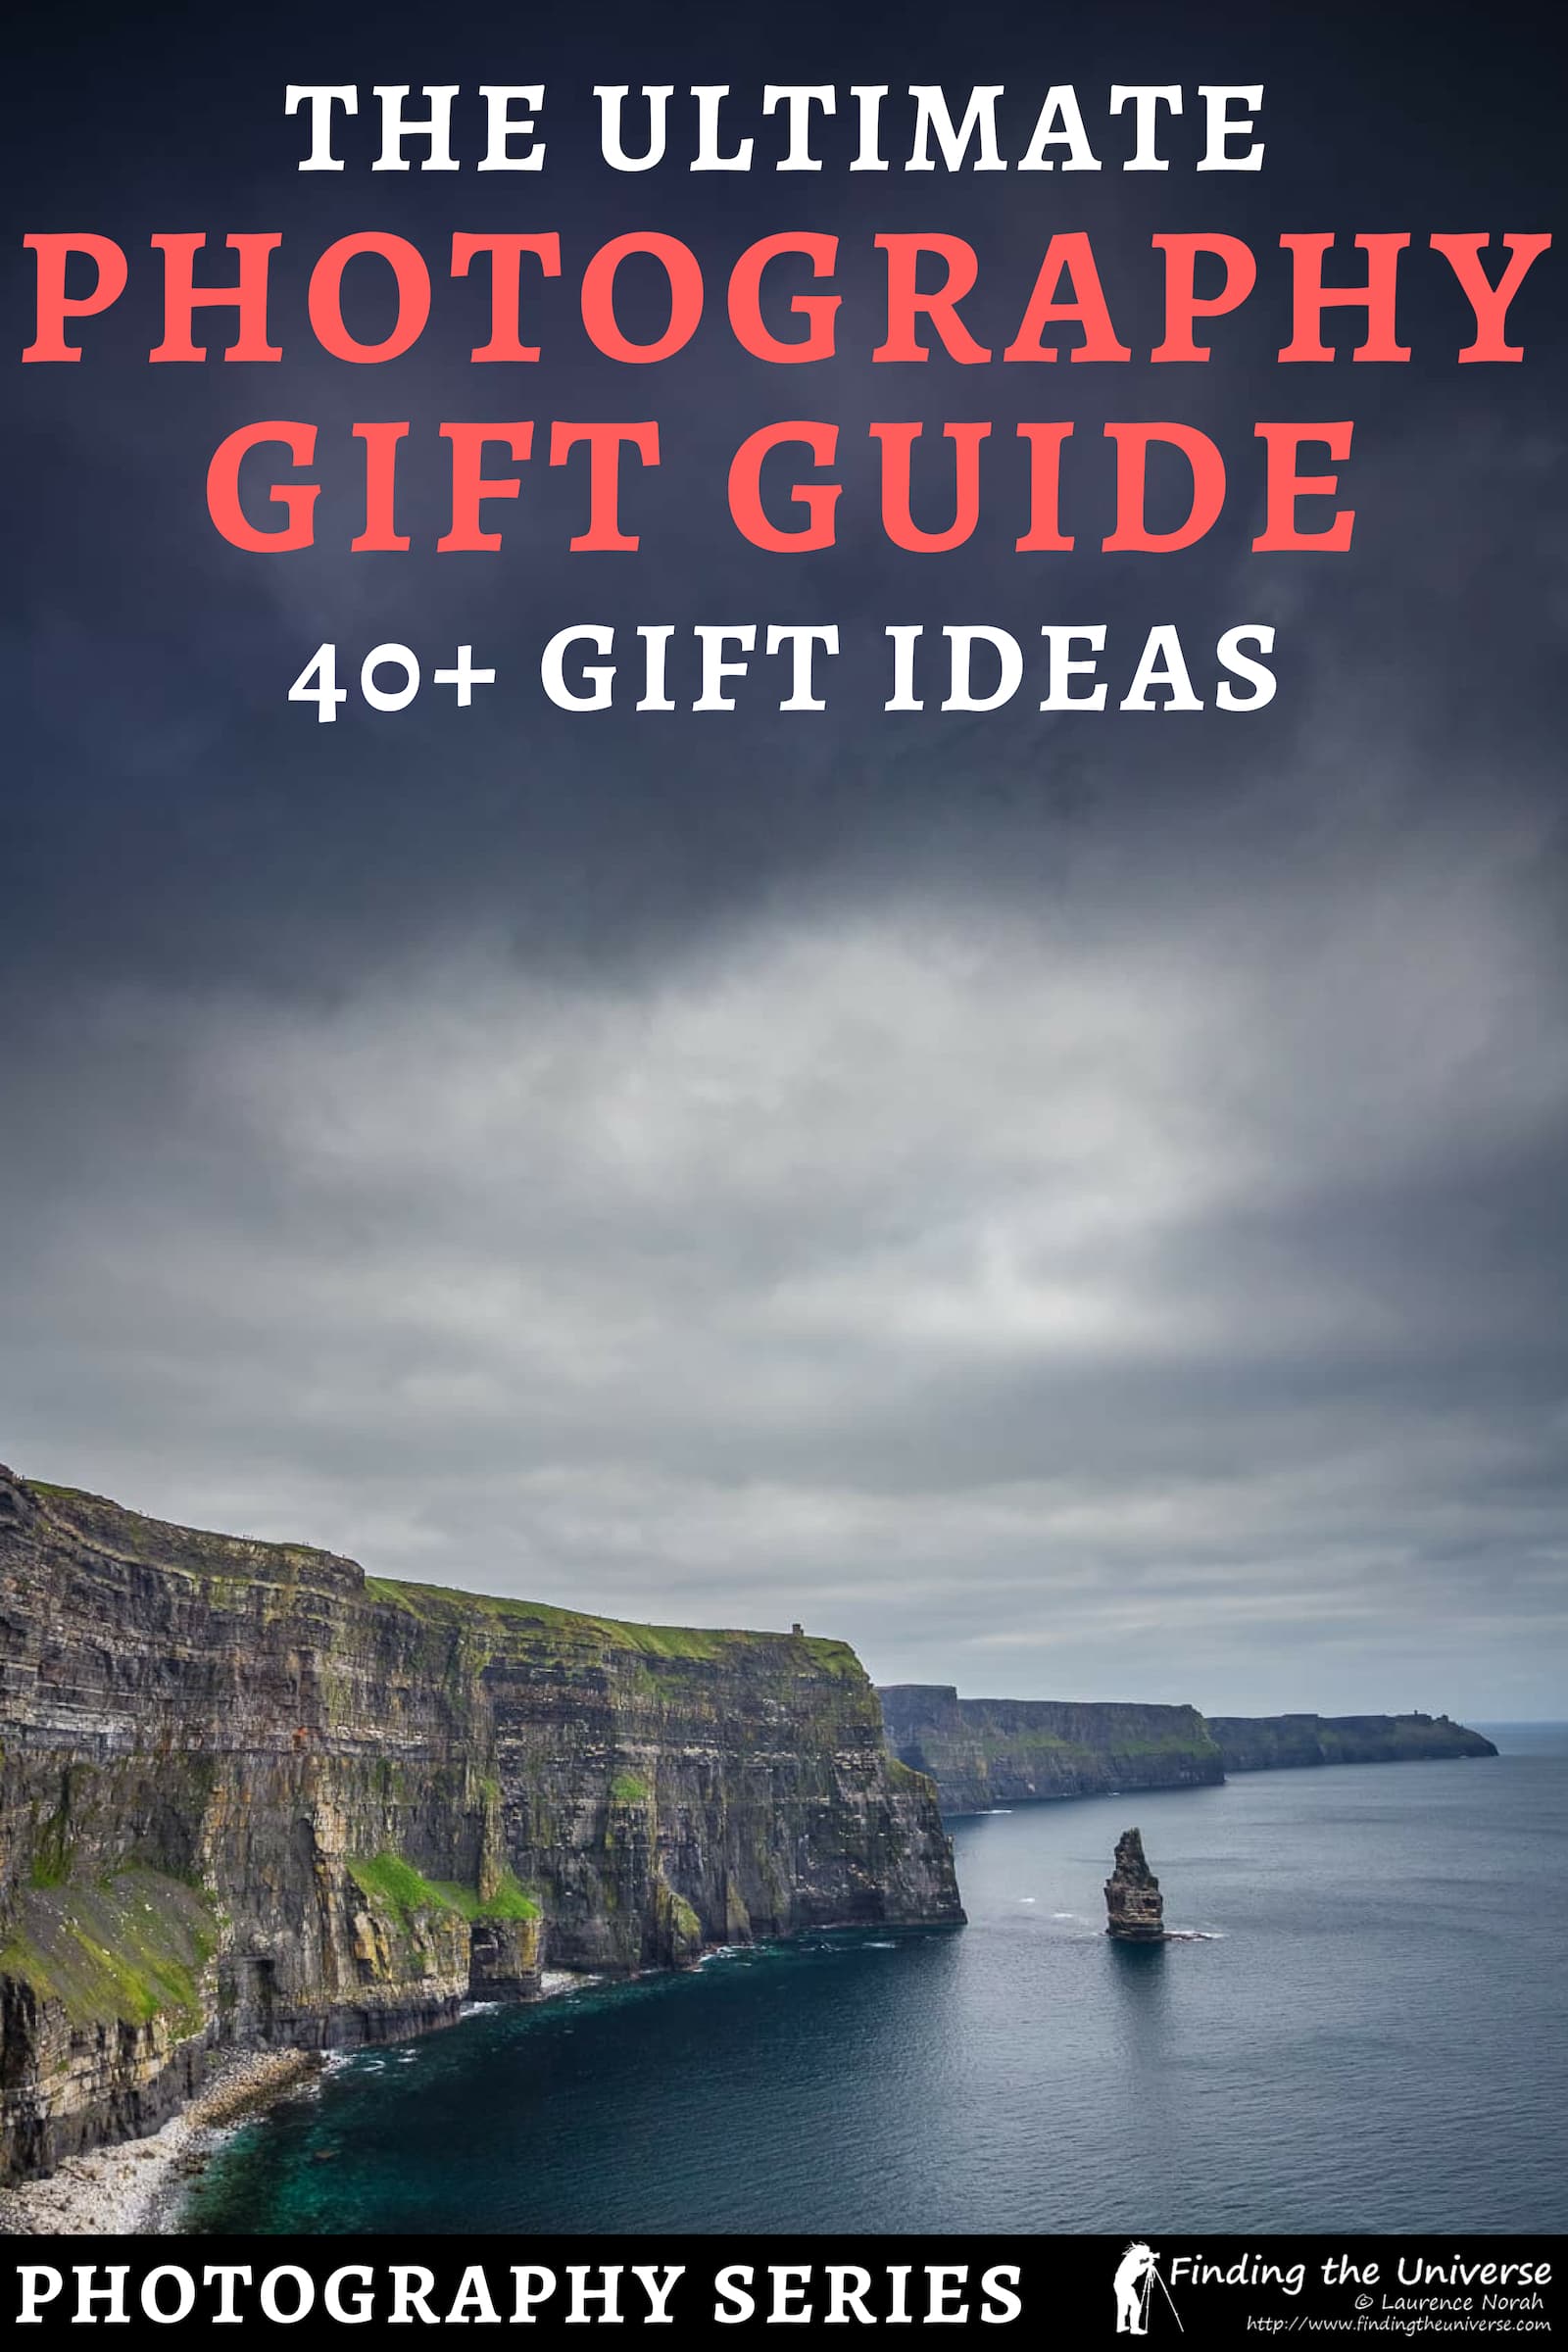 The ultimate guide to gifts for photographers, with a range of photography gifts for every level of photographer and at every price point! #photography #giftguide #gift #travel